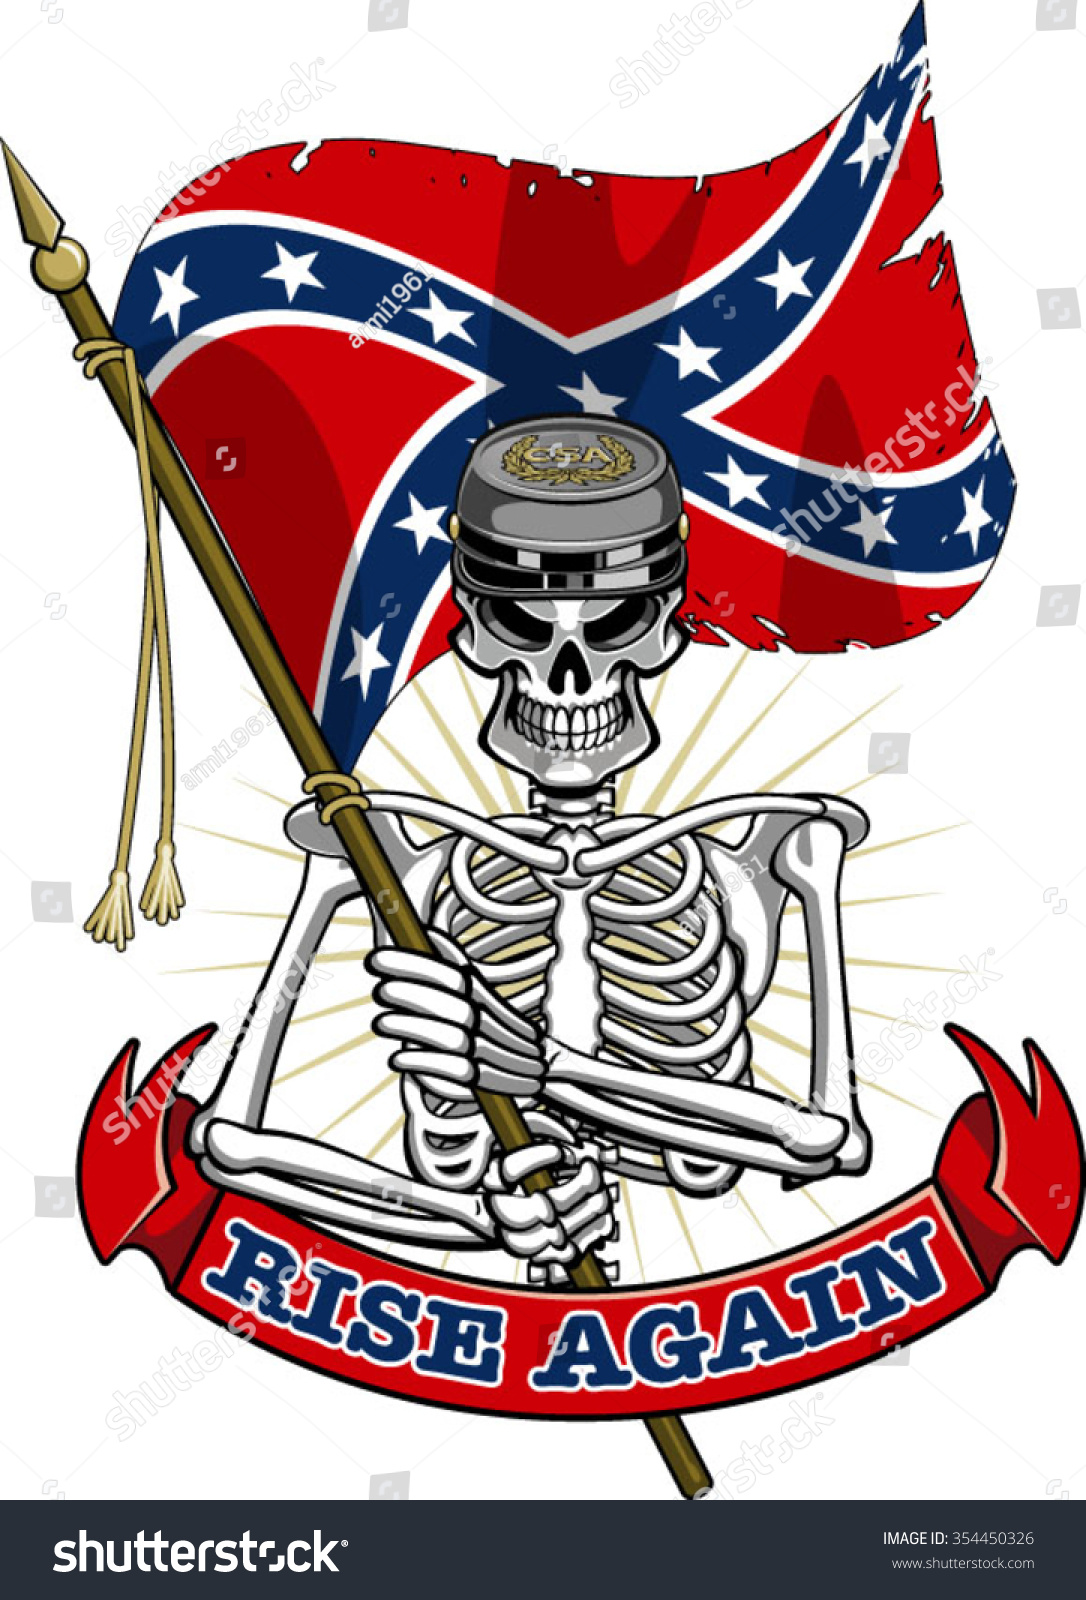 SVG of skeleton wearing confederate cap and flag, banner with text rise again svg